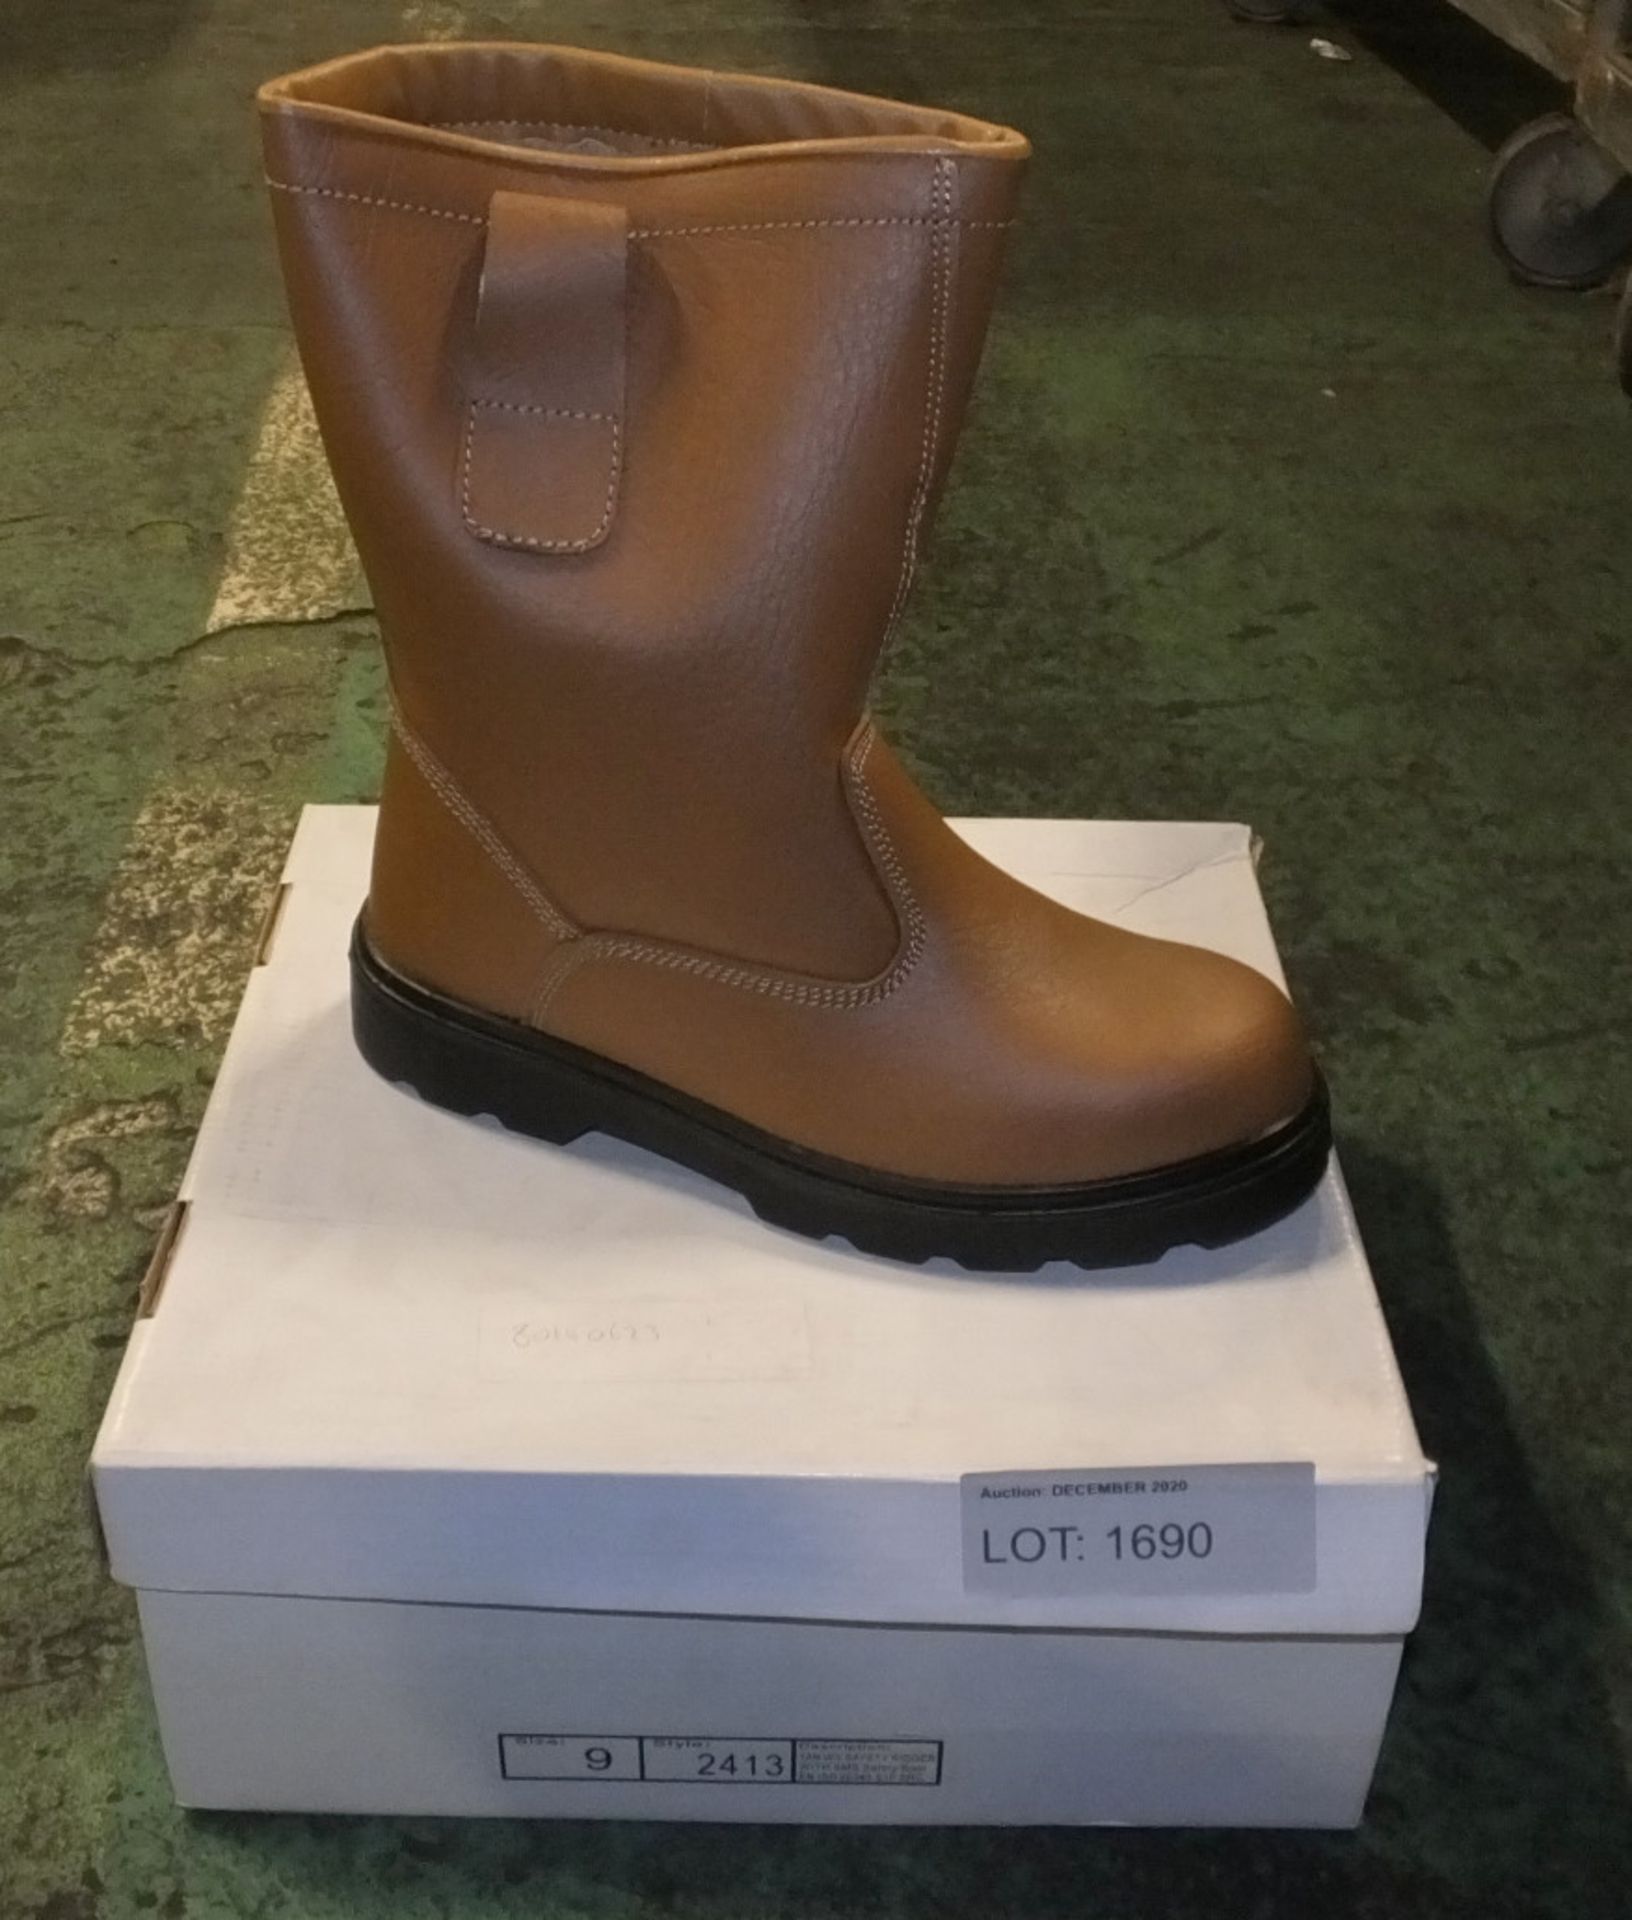 Safety boots - Tan W/L Rigger boots 2413 - UK9